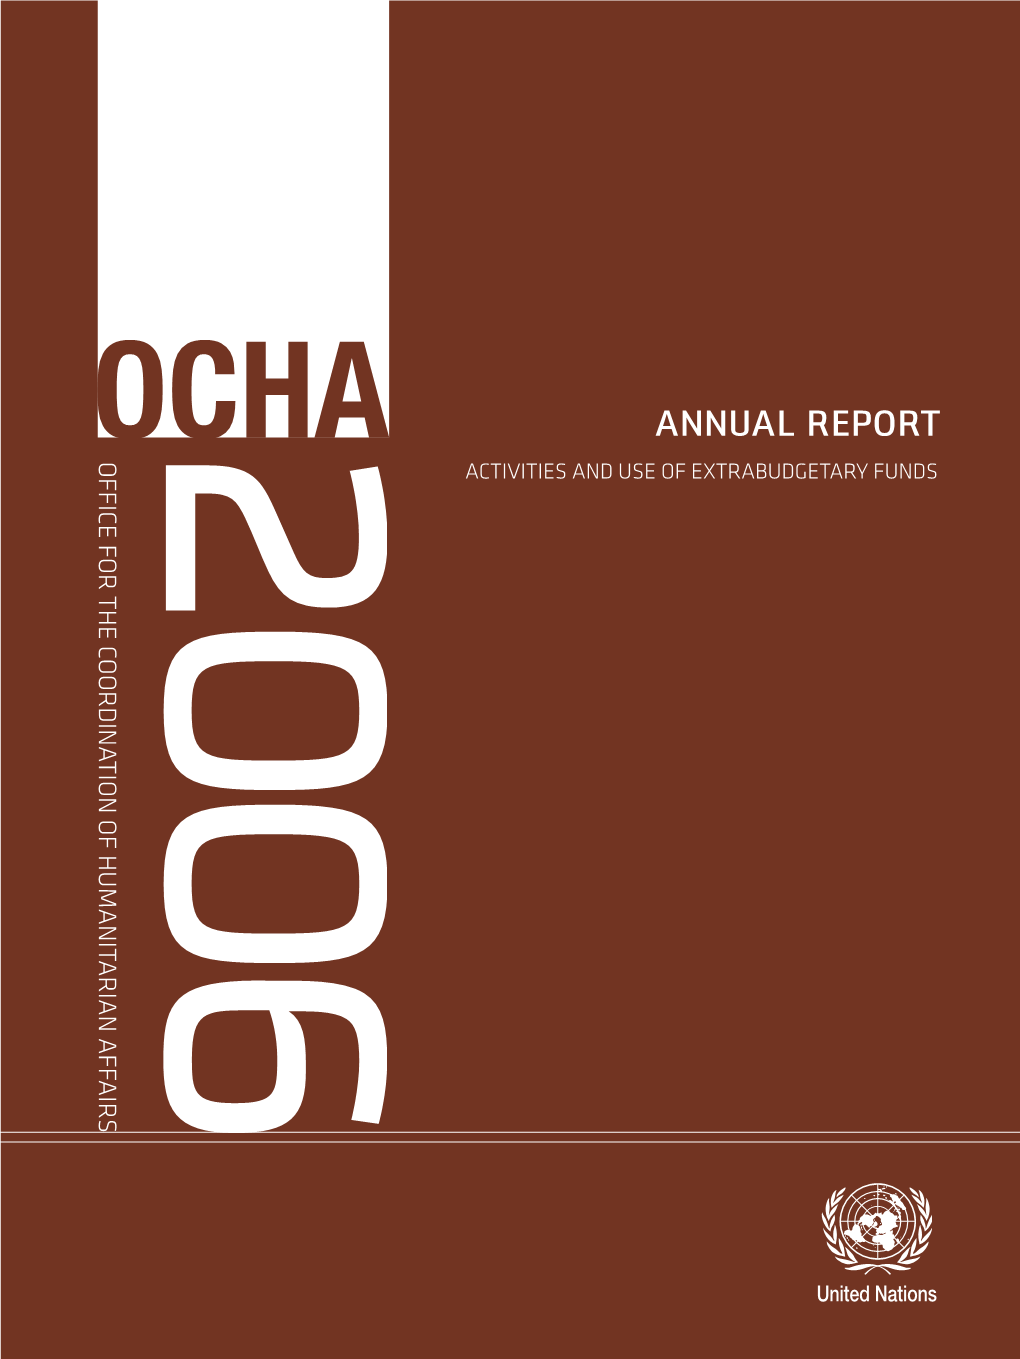 OCHA Annual Report 2006 Activities and Use of Extrabudgetary Funds